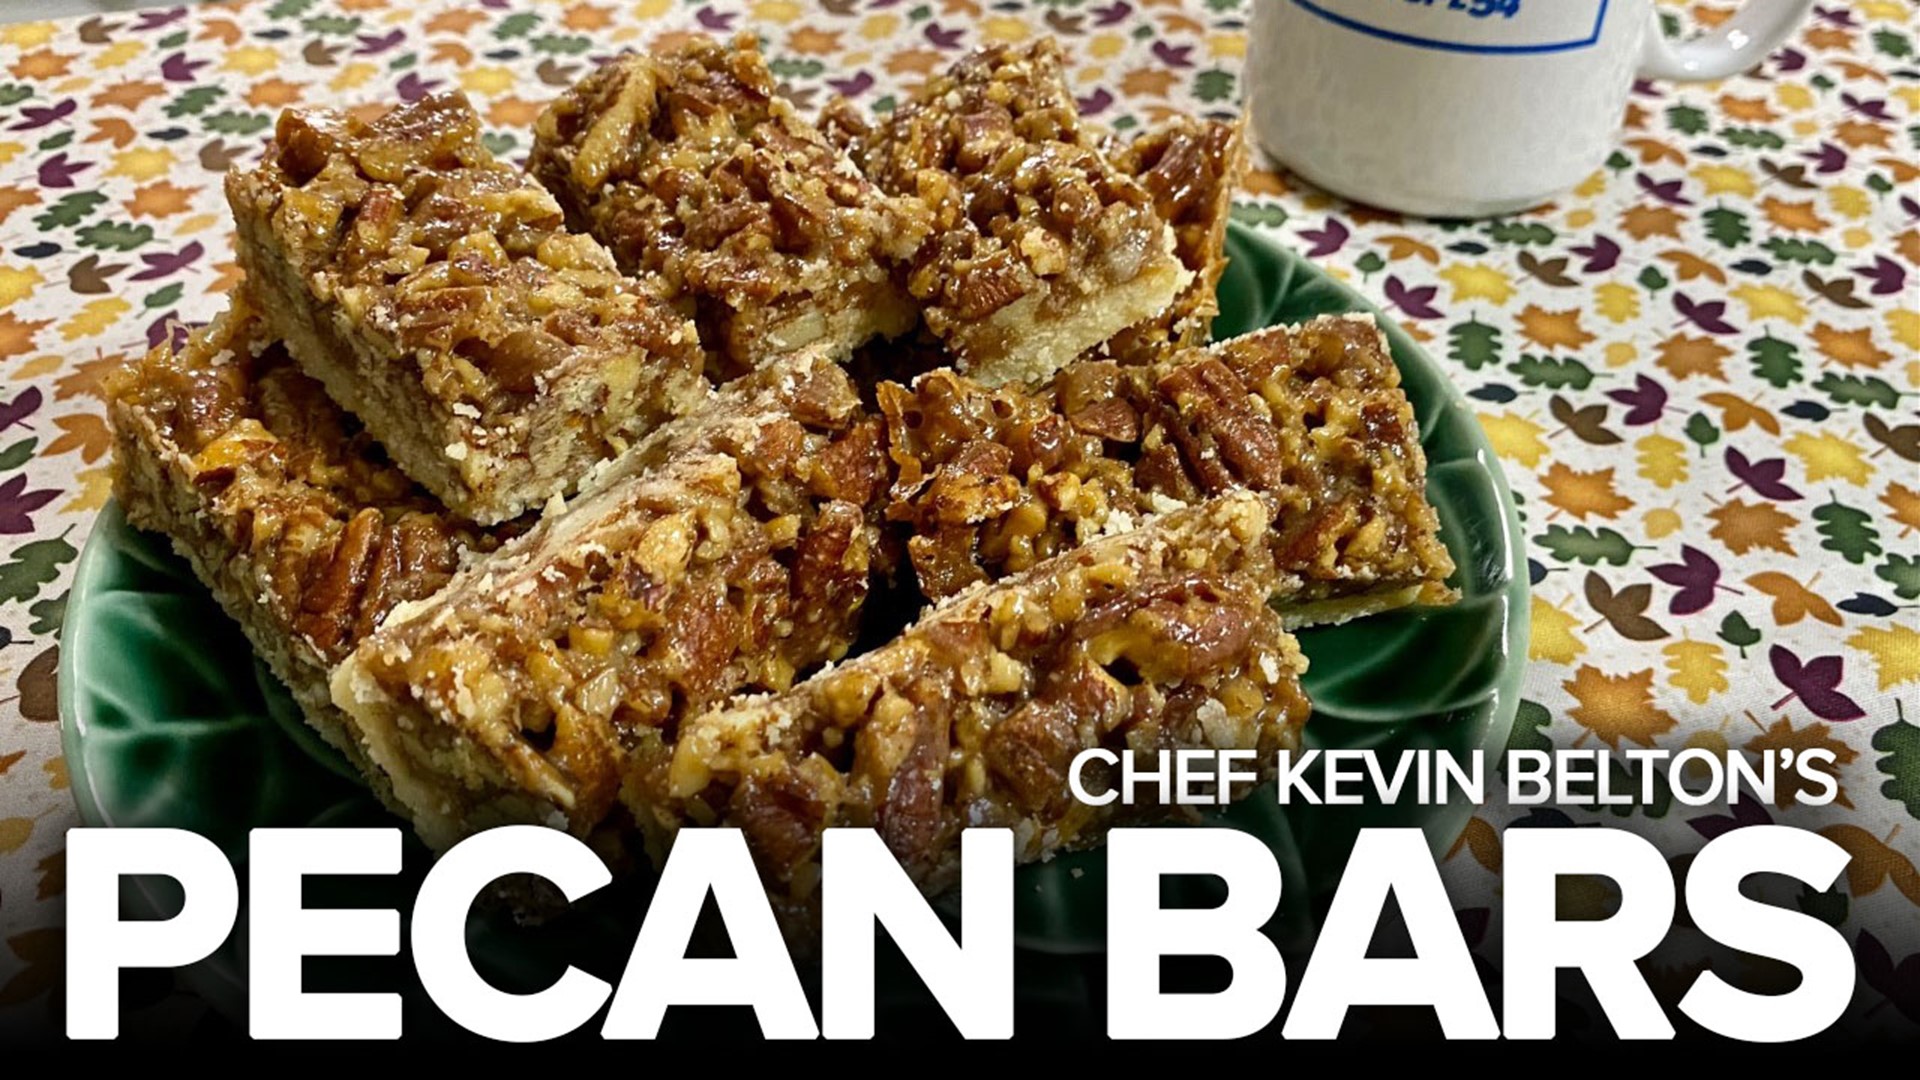 It's National Dessert Day! So we're celebrating with fresh Pecan Bars.